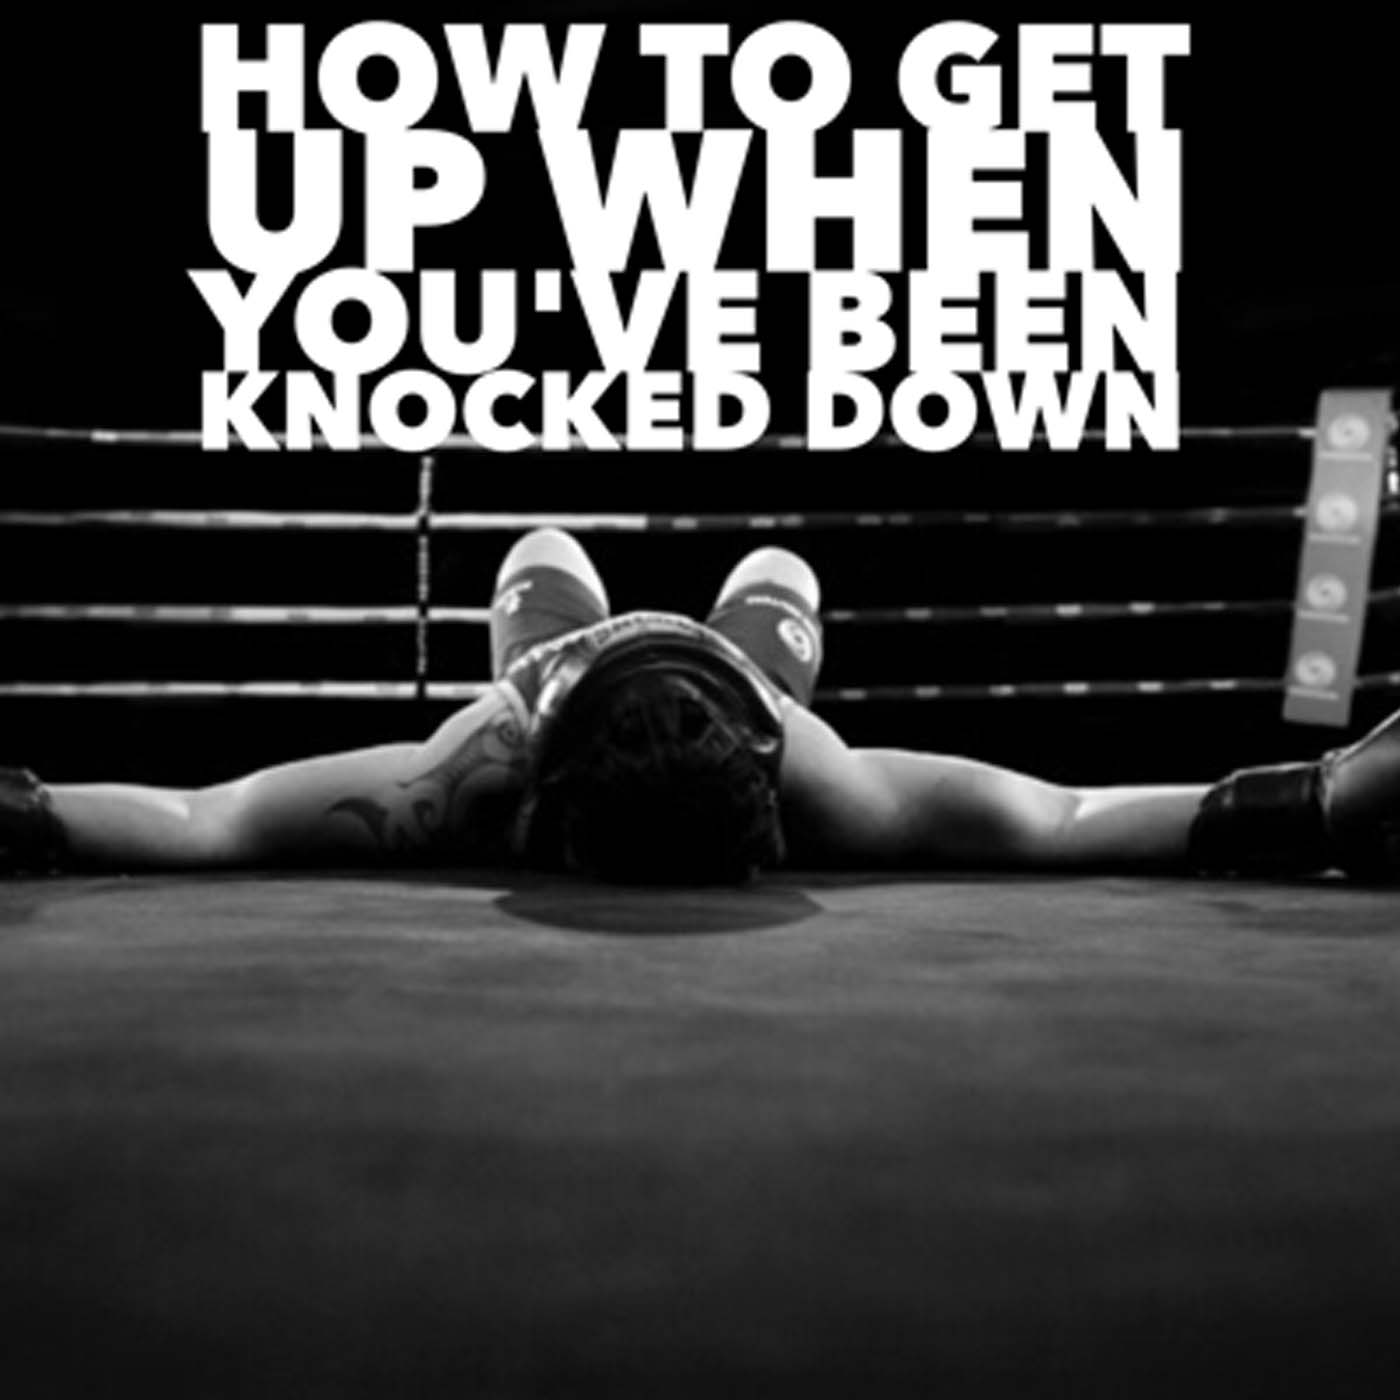 How To Get Up When You've Been Knocked Down - Rob Yanok